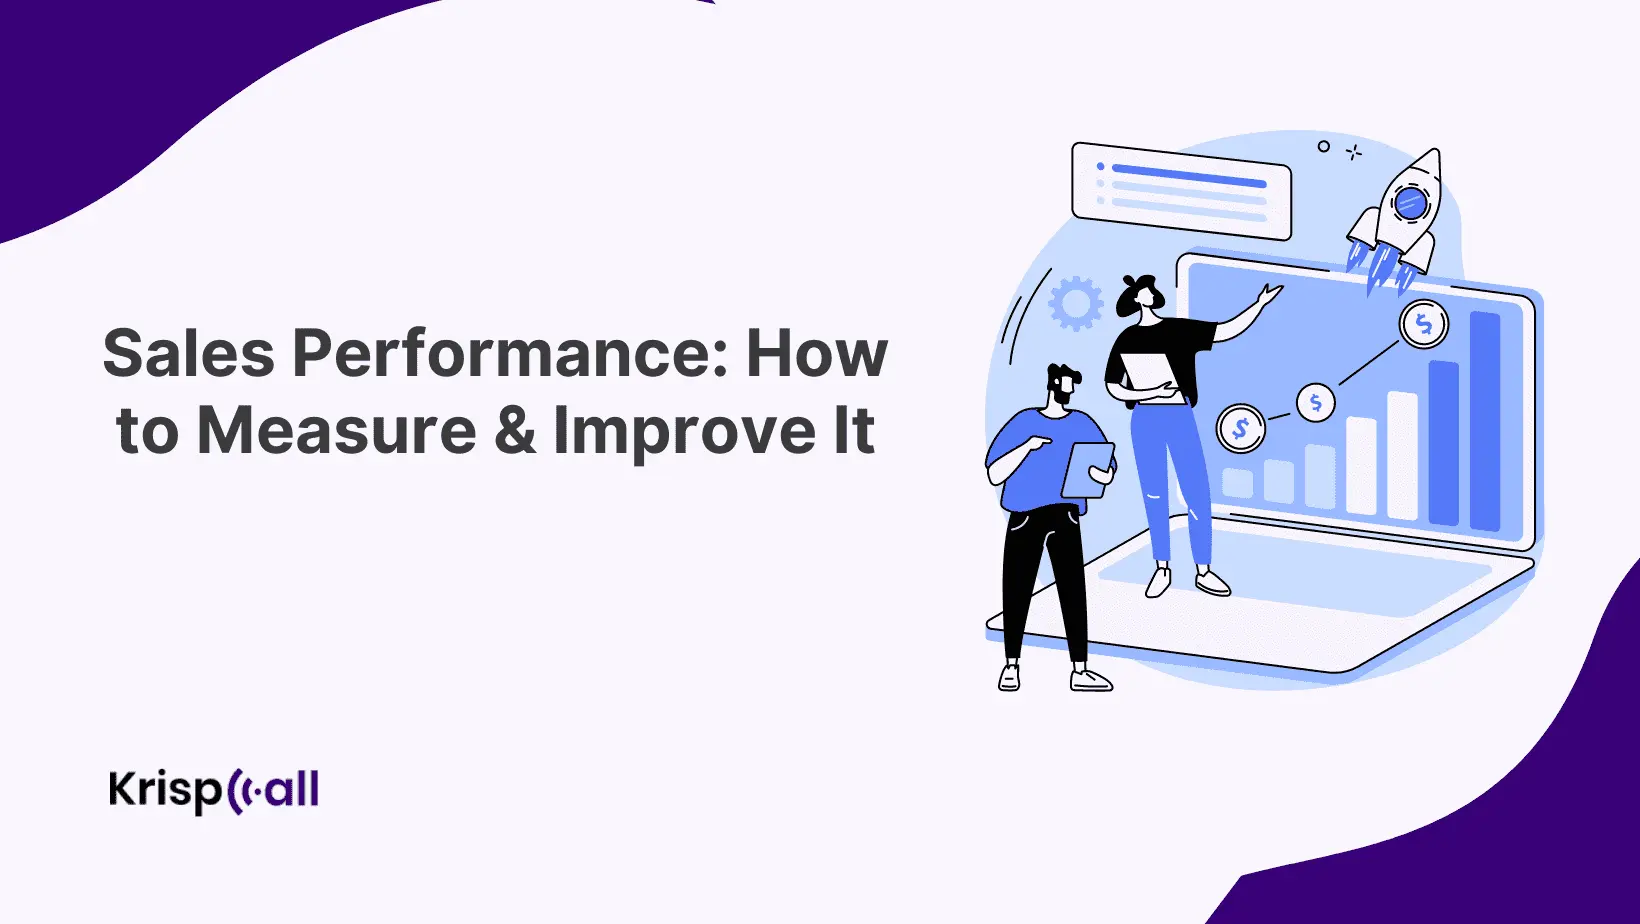 Sales-Performance-How-to-Measure-Improve-It-1